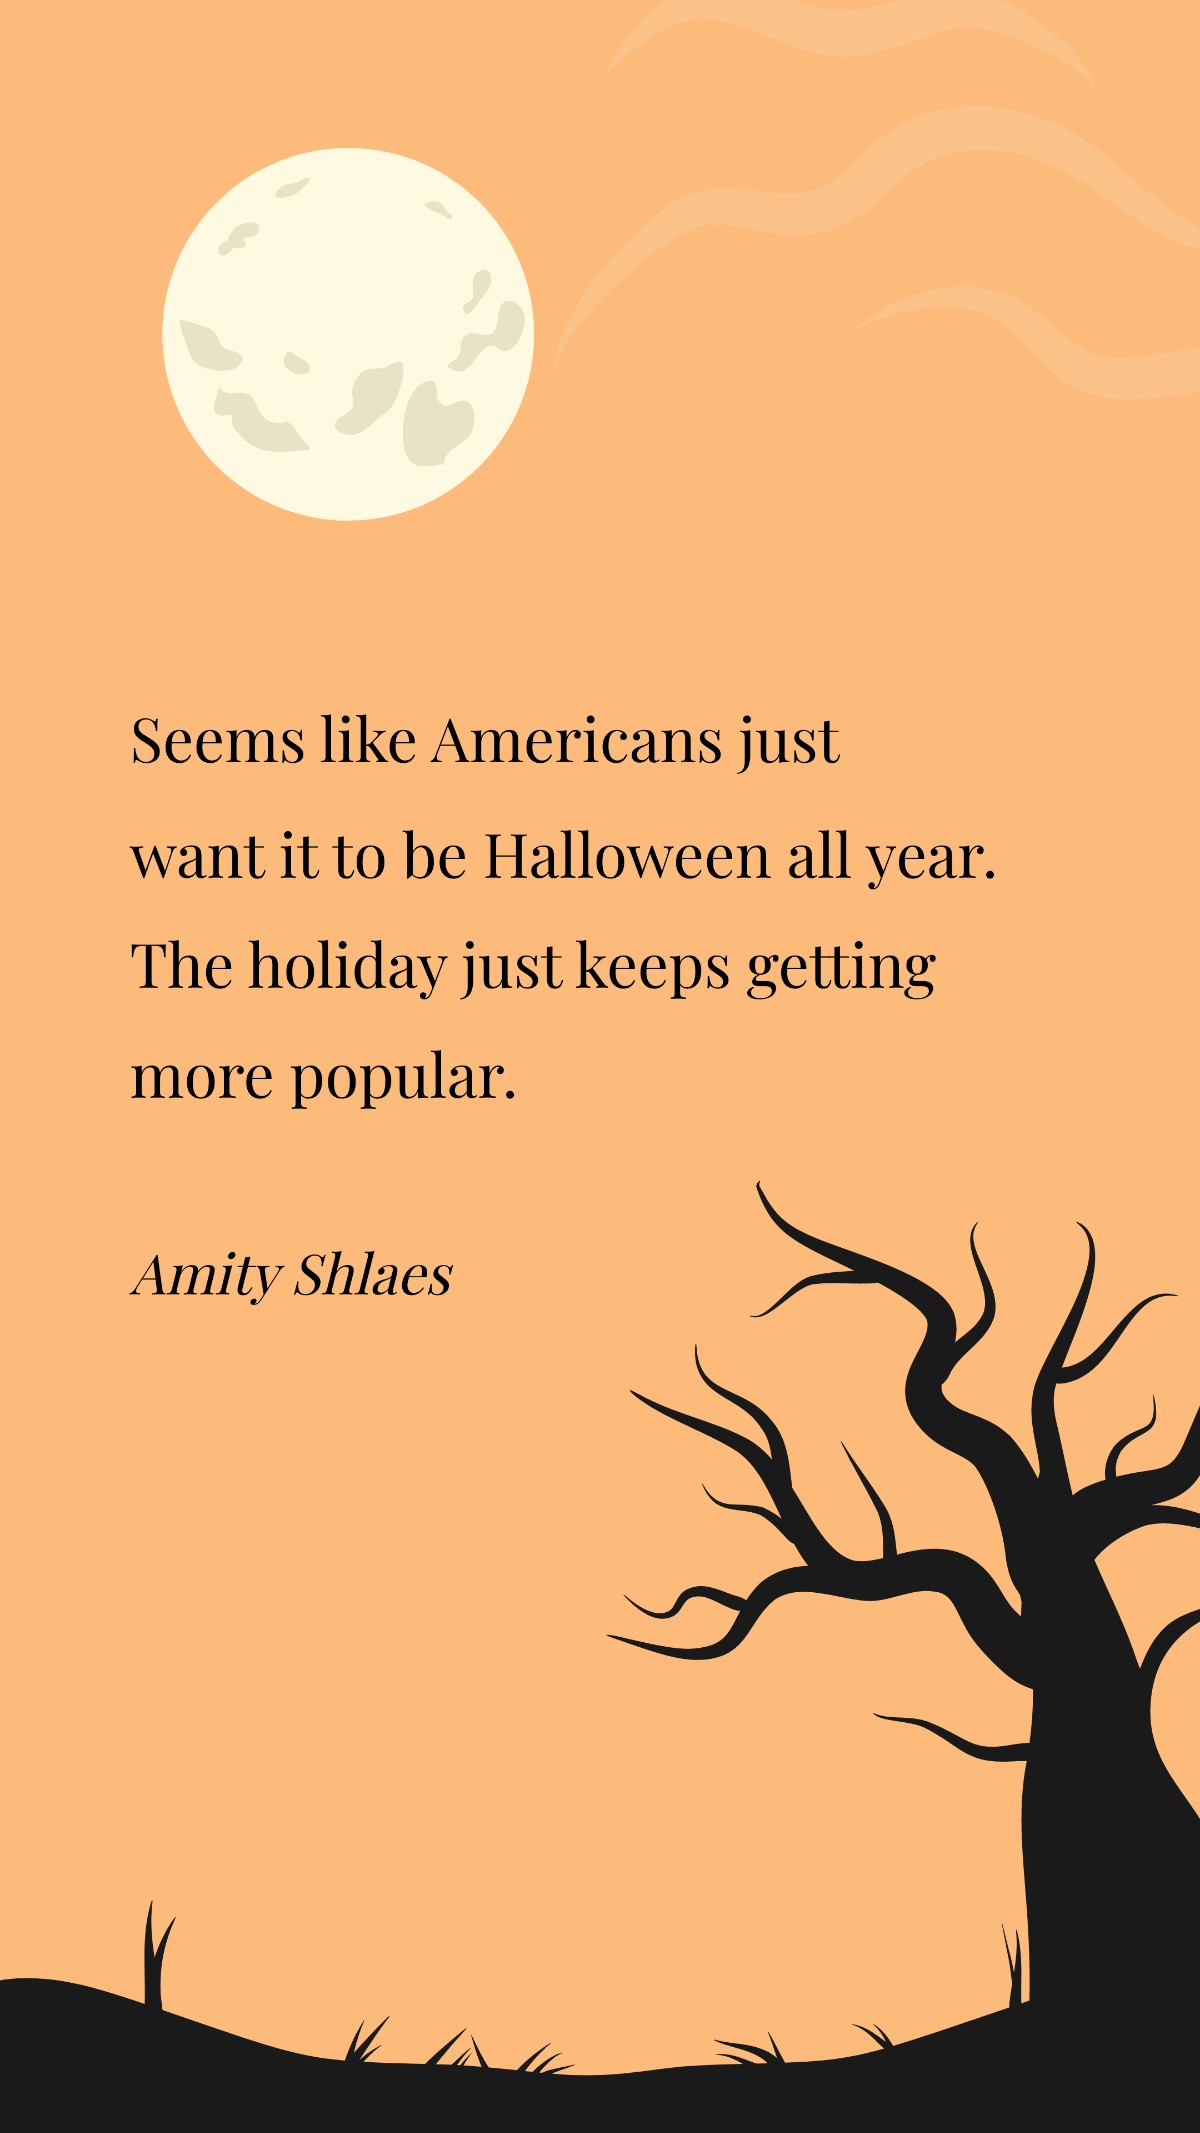  Amity Shlaes- Seems like Americans just want it to be Halloween all year. The holiday just keeps getting more popular.  Template